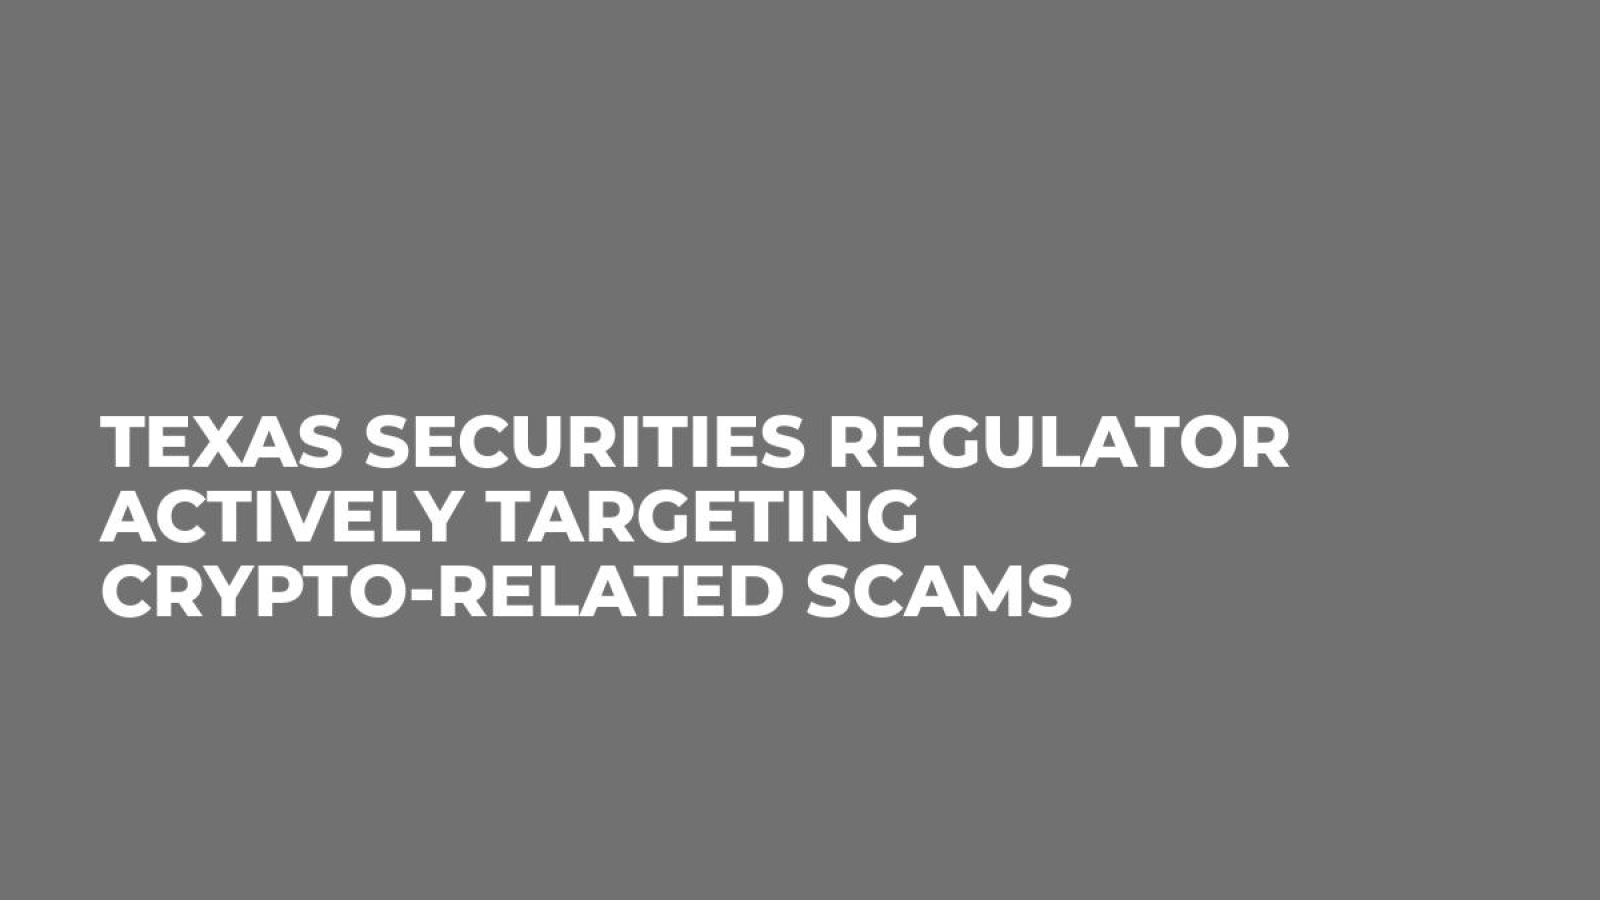 Texas Securities Regulator Actively Targeting Crypto-Related Scams